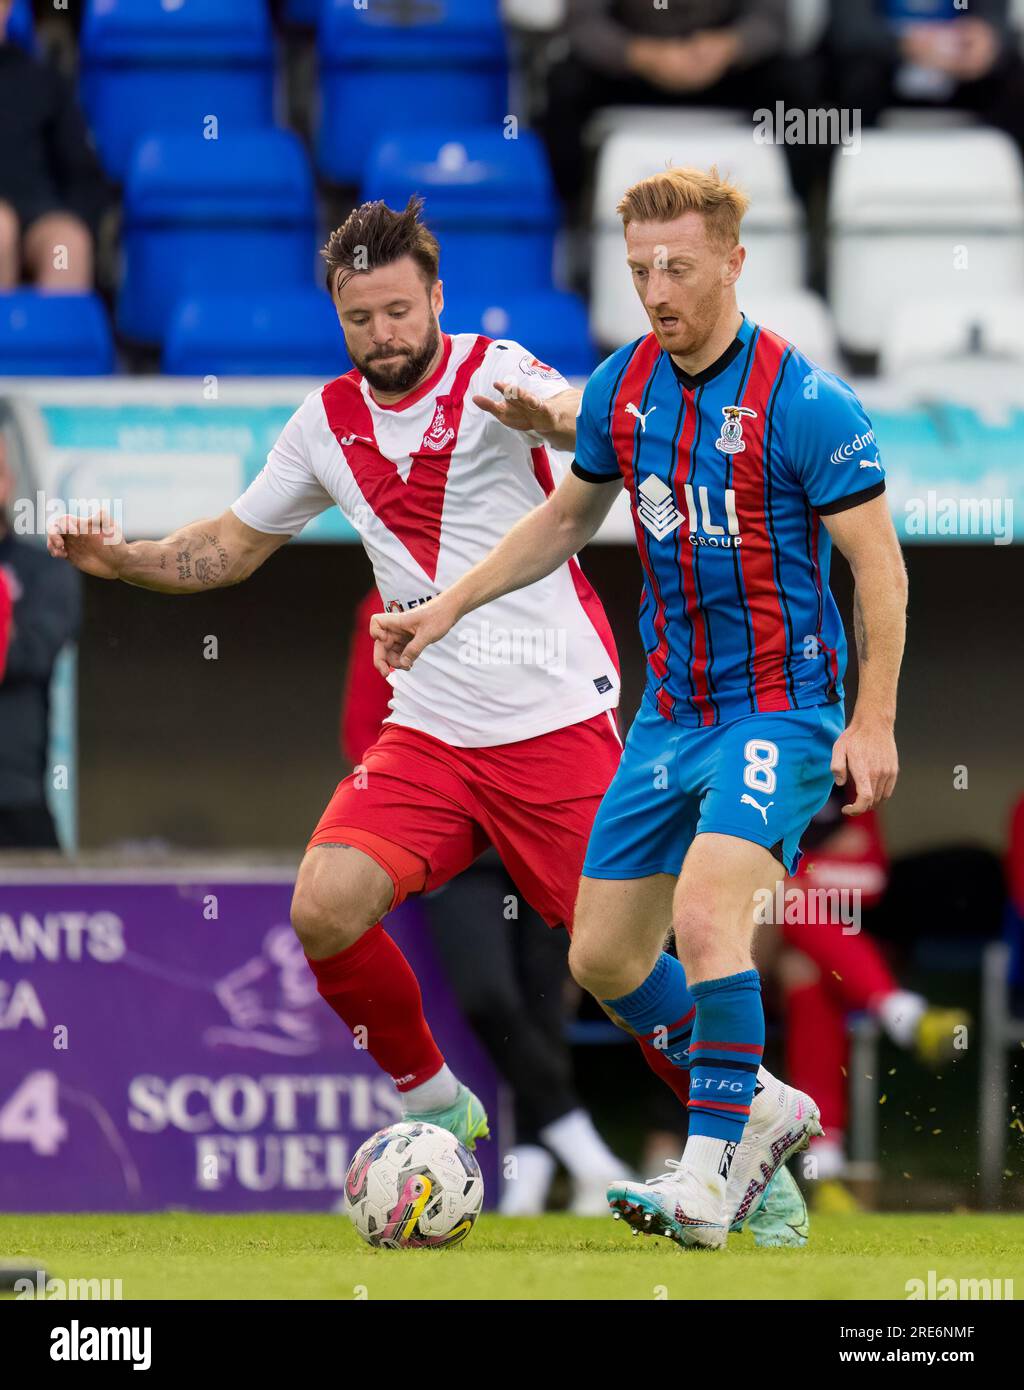 Caledonian Stadium, Inverness, UK. 25th July, 2023. This is from the Viaplay Cup tie between Inverness Caledonian Thistle FC (ICT) and Airdrieonians FC. PICTURE CONTENT:- ICT - David Carson Credit: JASPERIMAGE/Alamy Live News Stock Photo